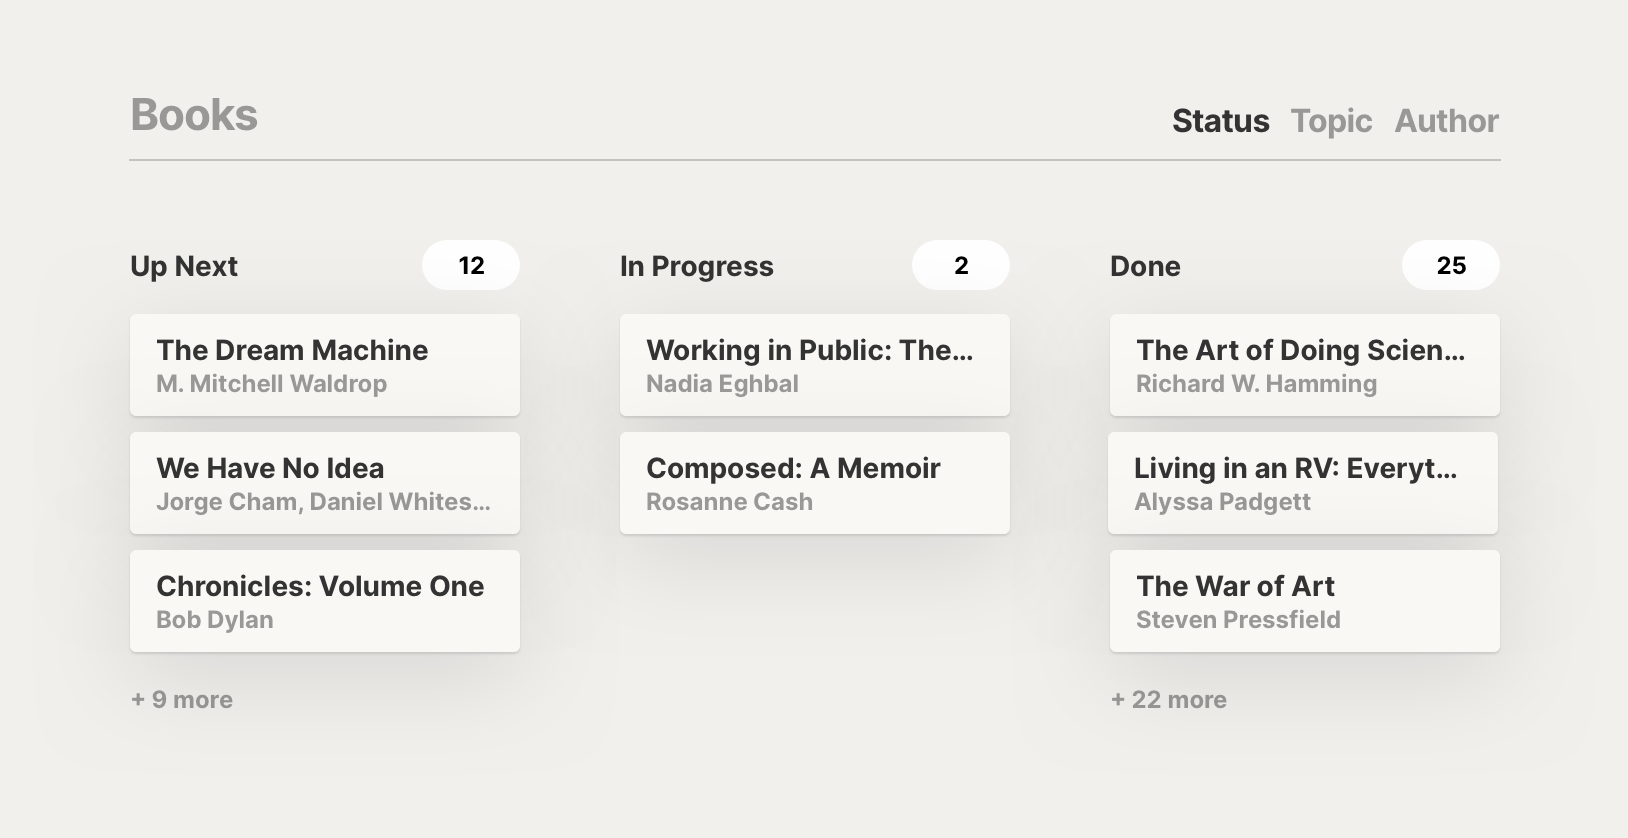 An automatically-organized view of book items in separate columns for each status.